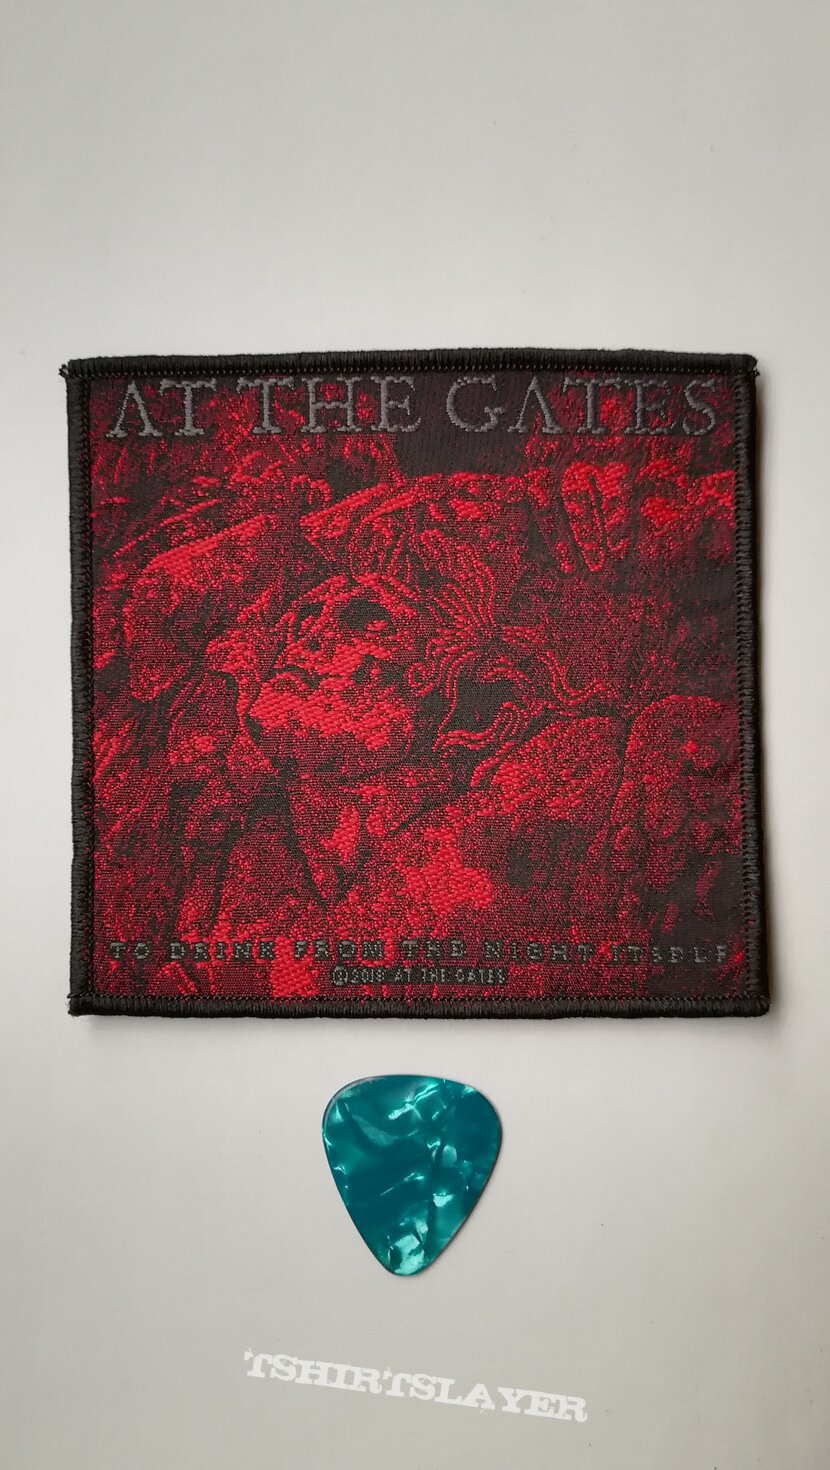 At The Gates - To Drink From The Night Itself - Patch 